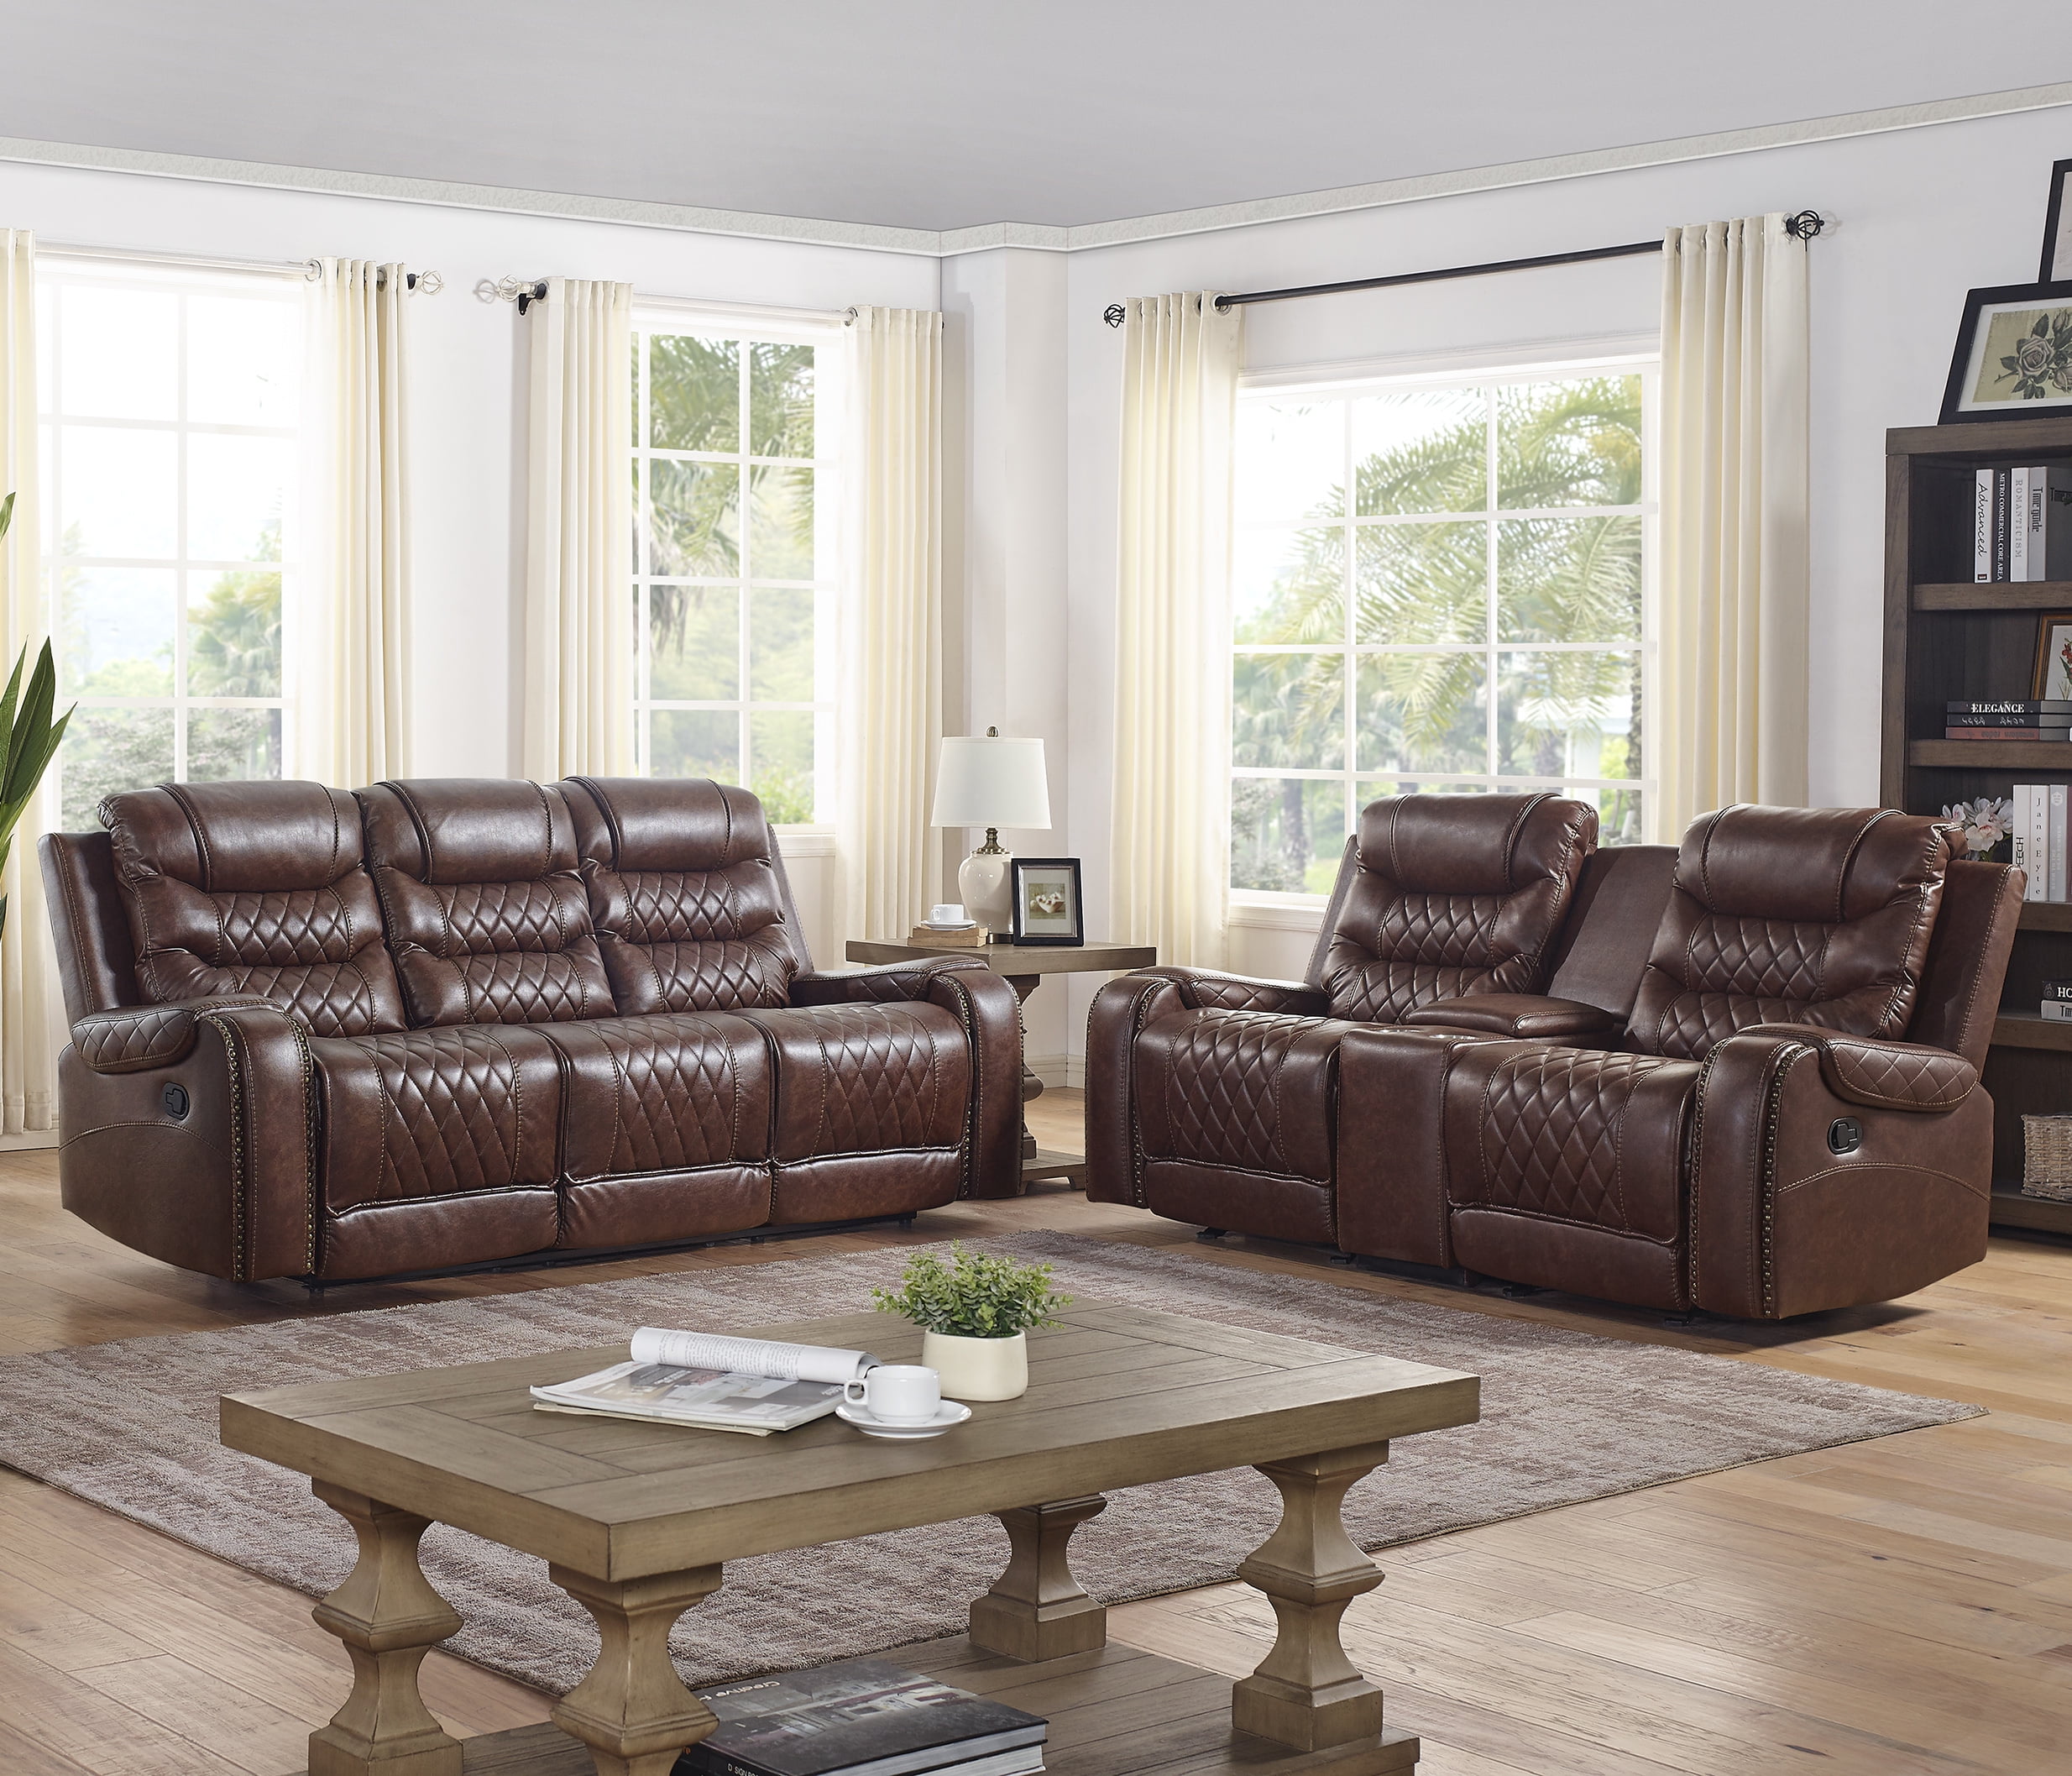 Klens Faux Leather Reclining Sofa And